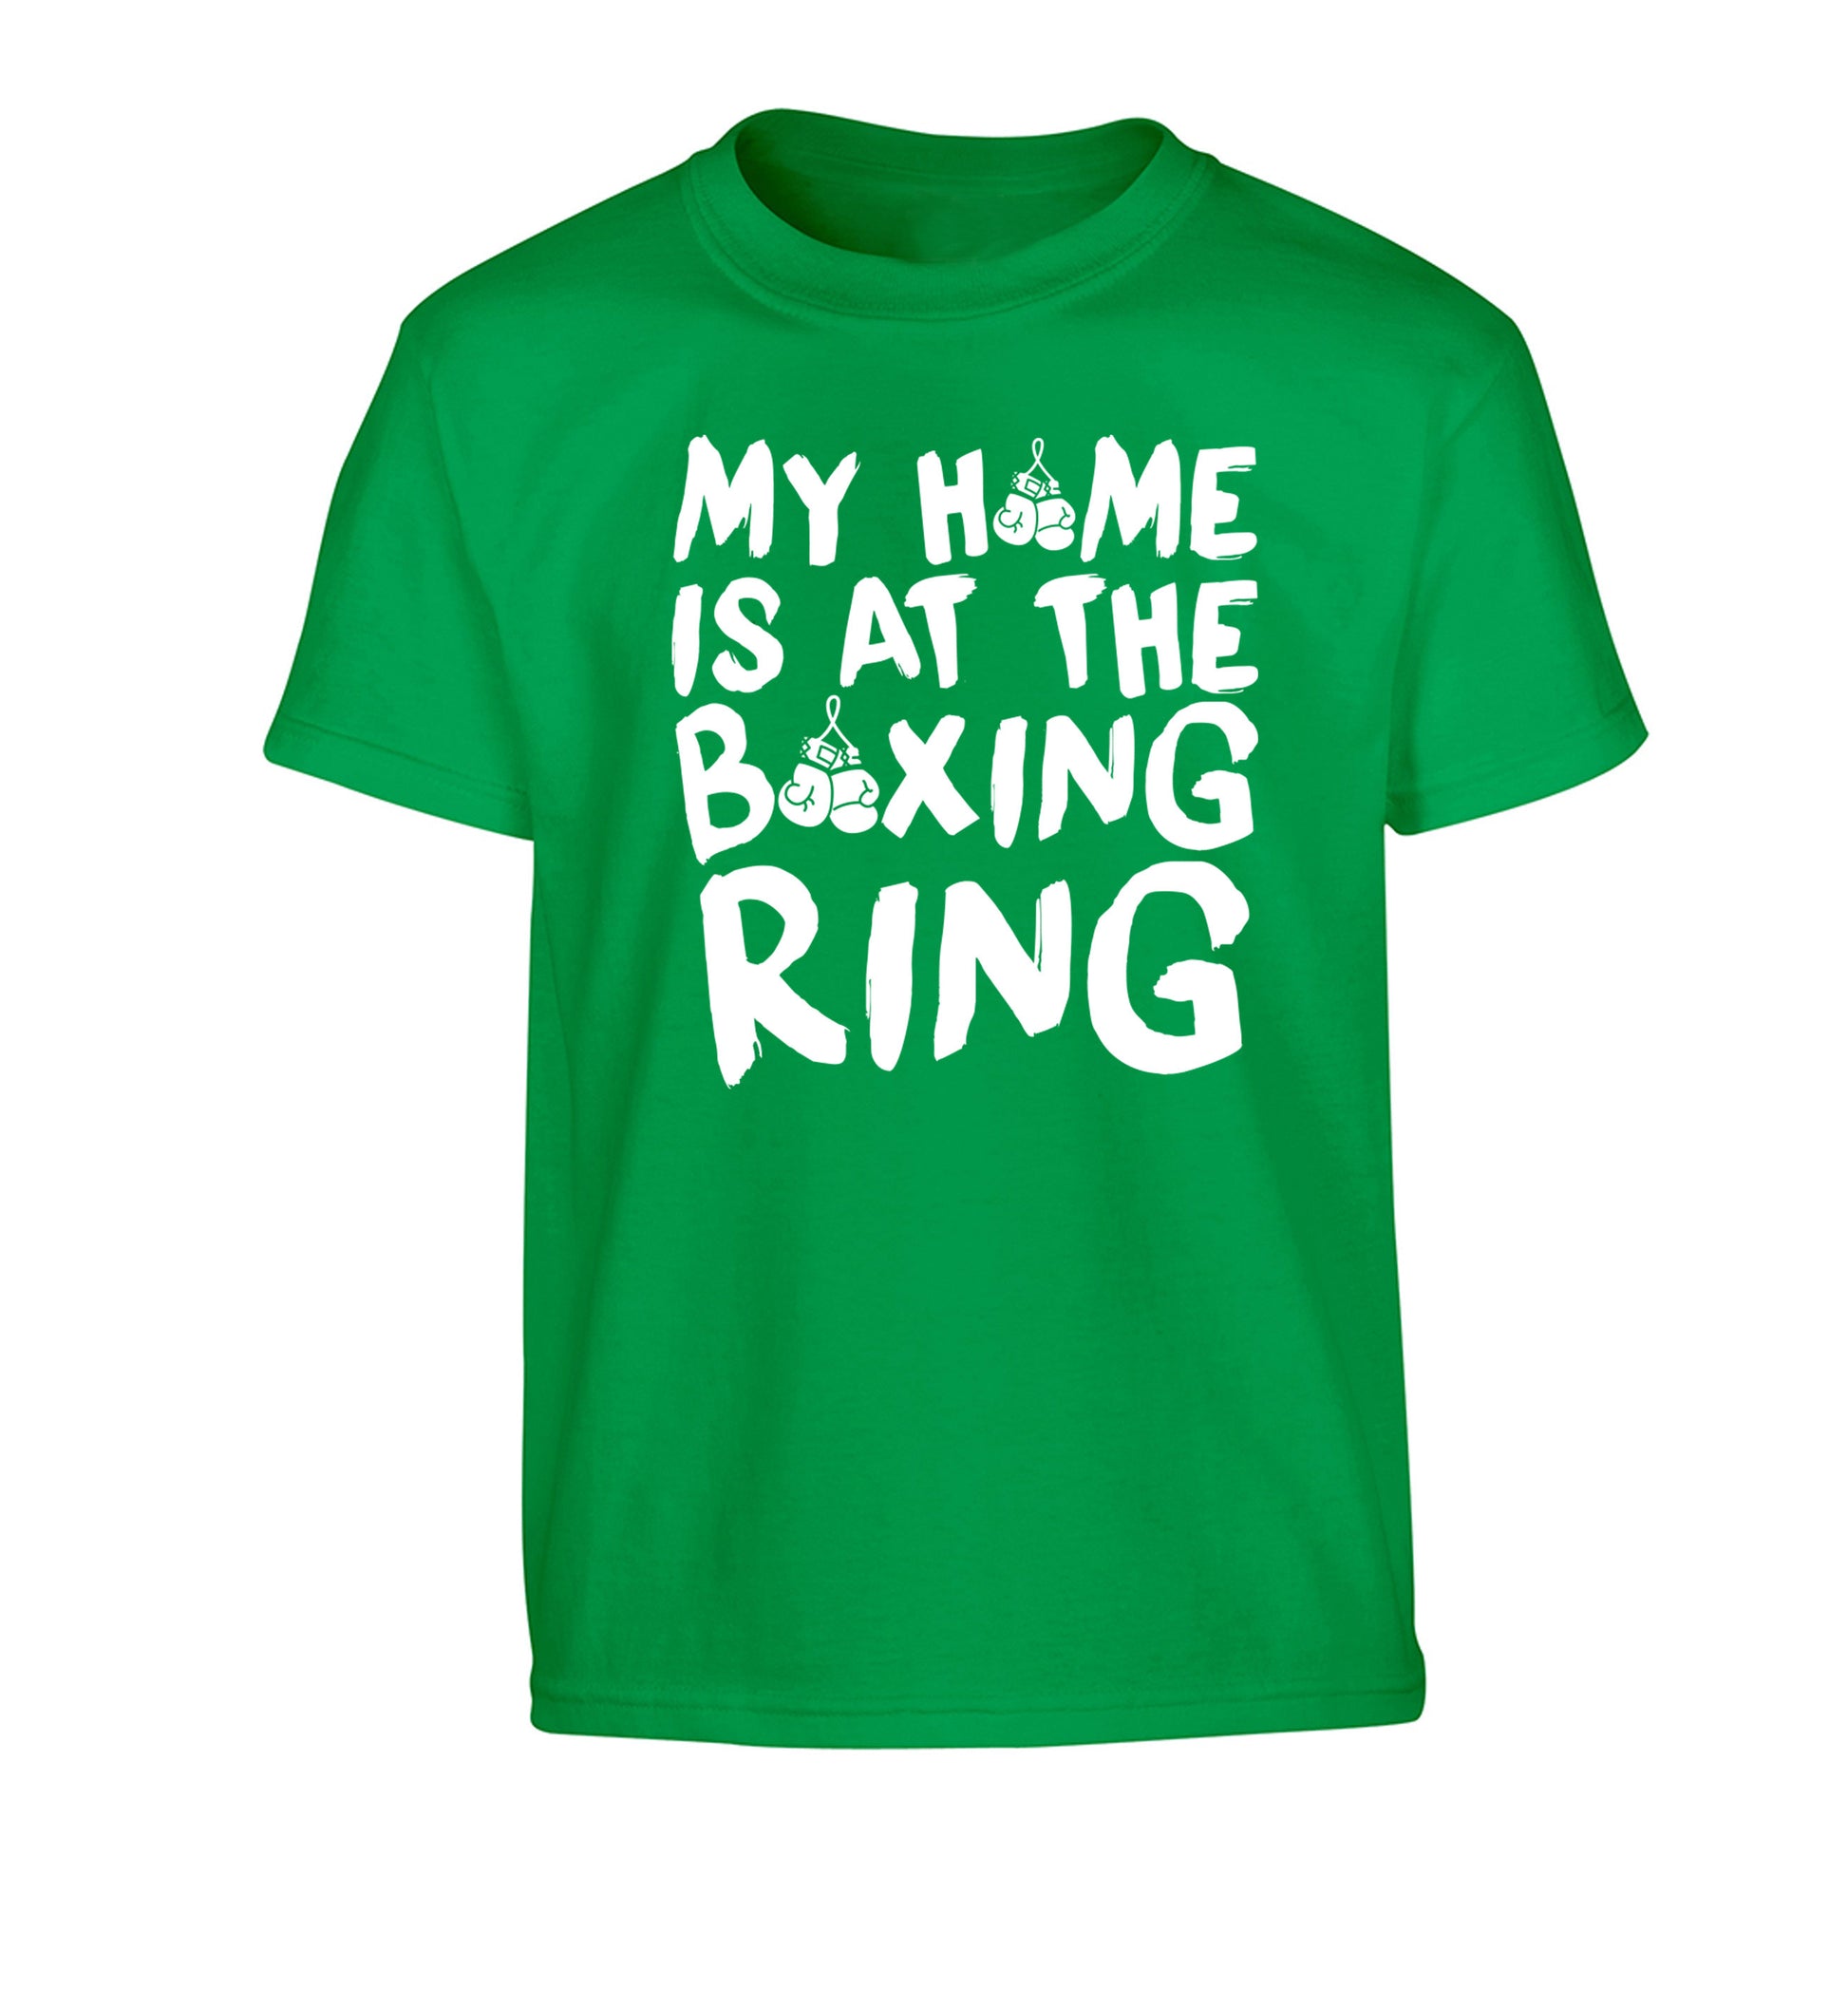 My home is at the boxing ring Children's green Tshirt 12-14 Years